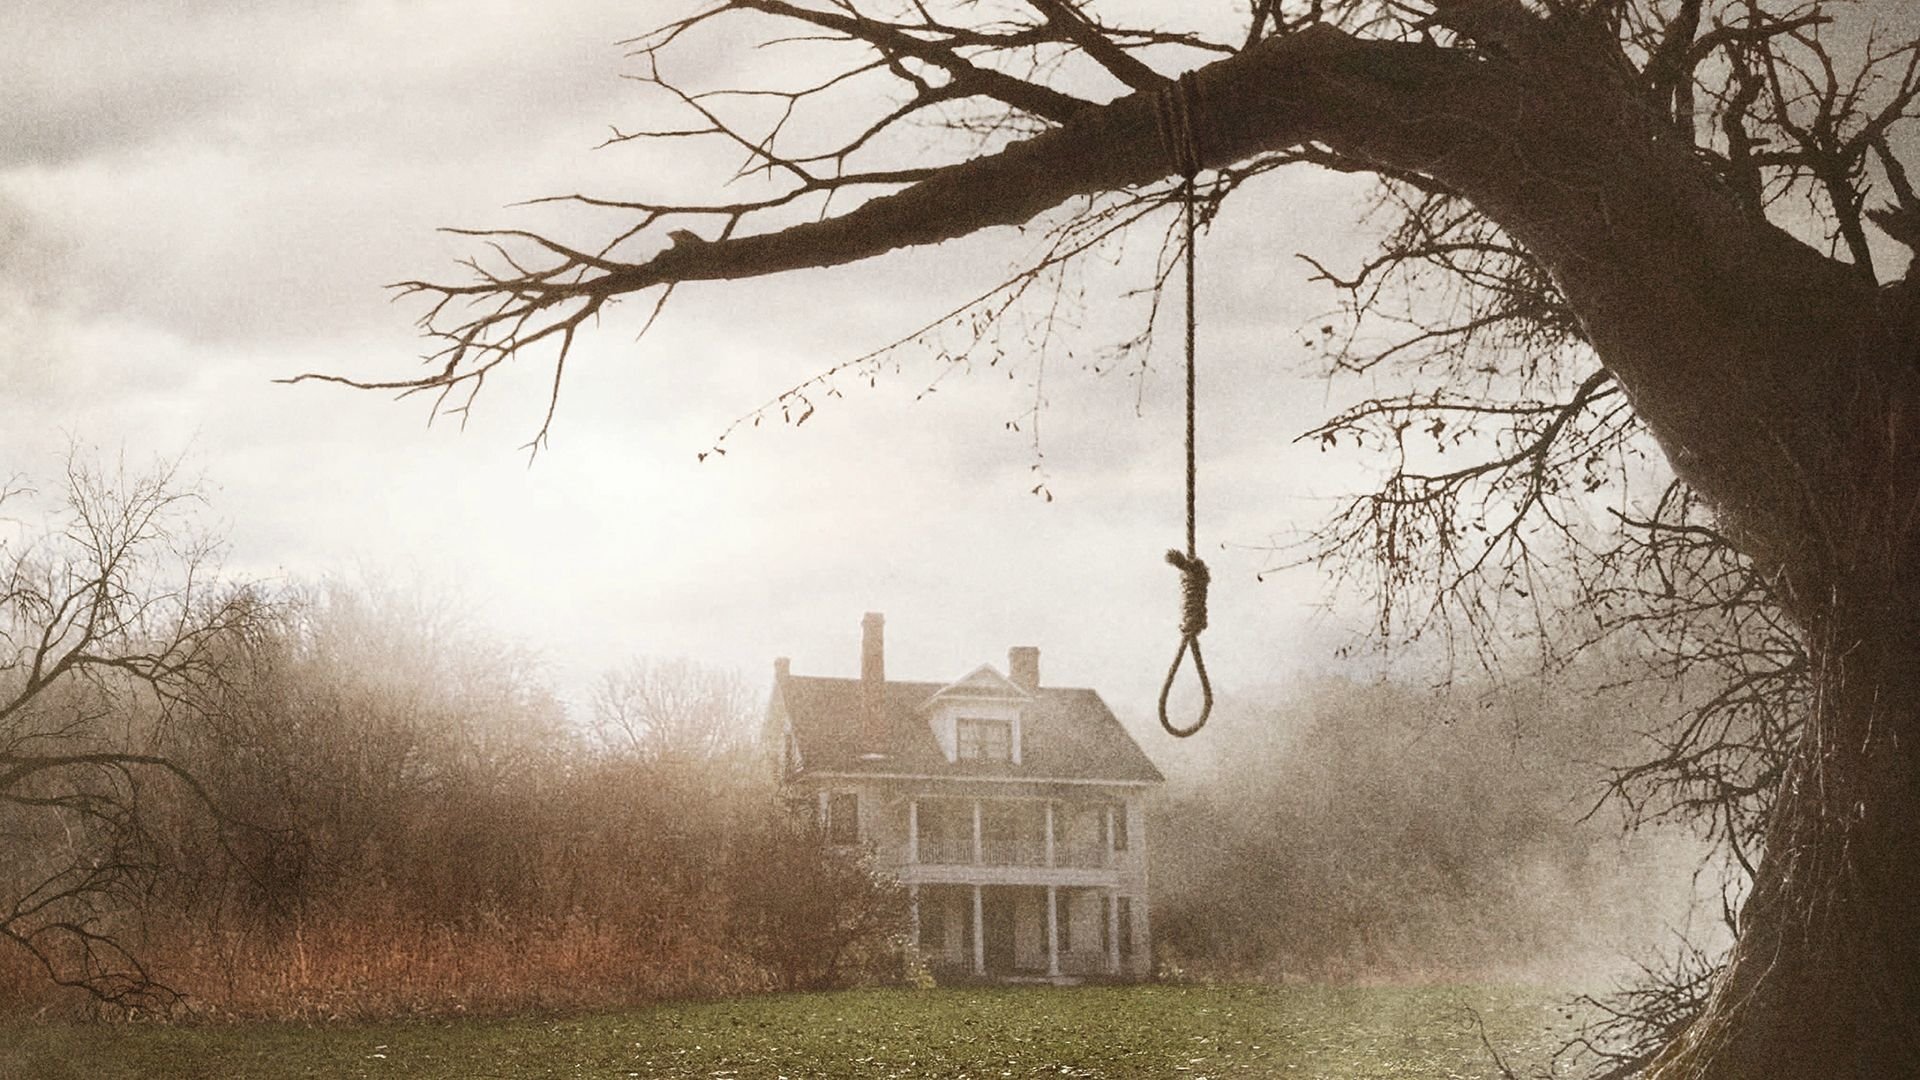 the conjuring hd free